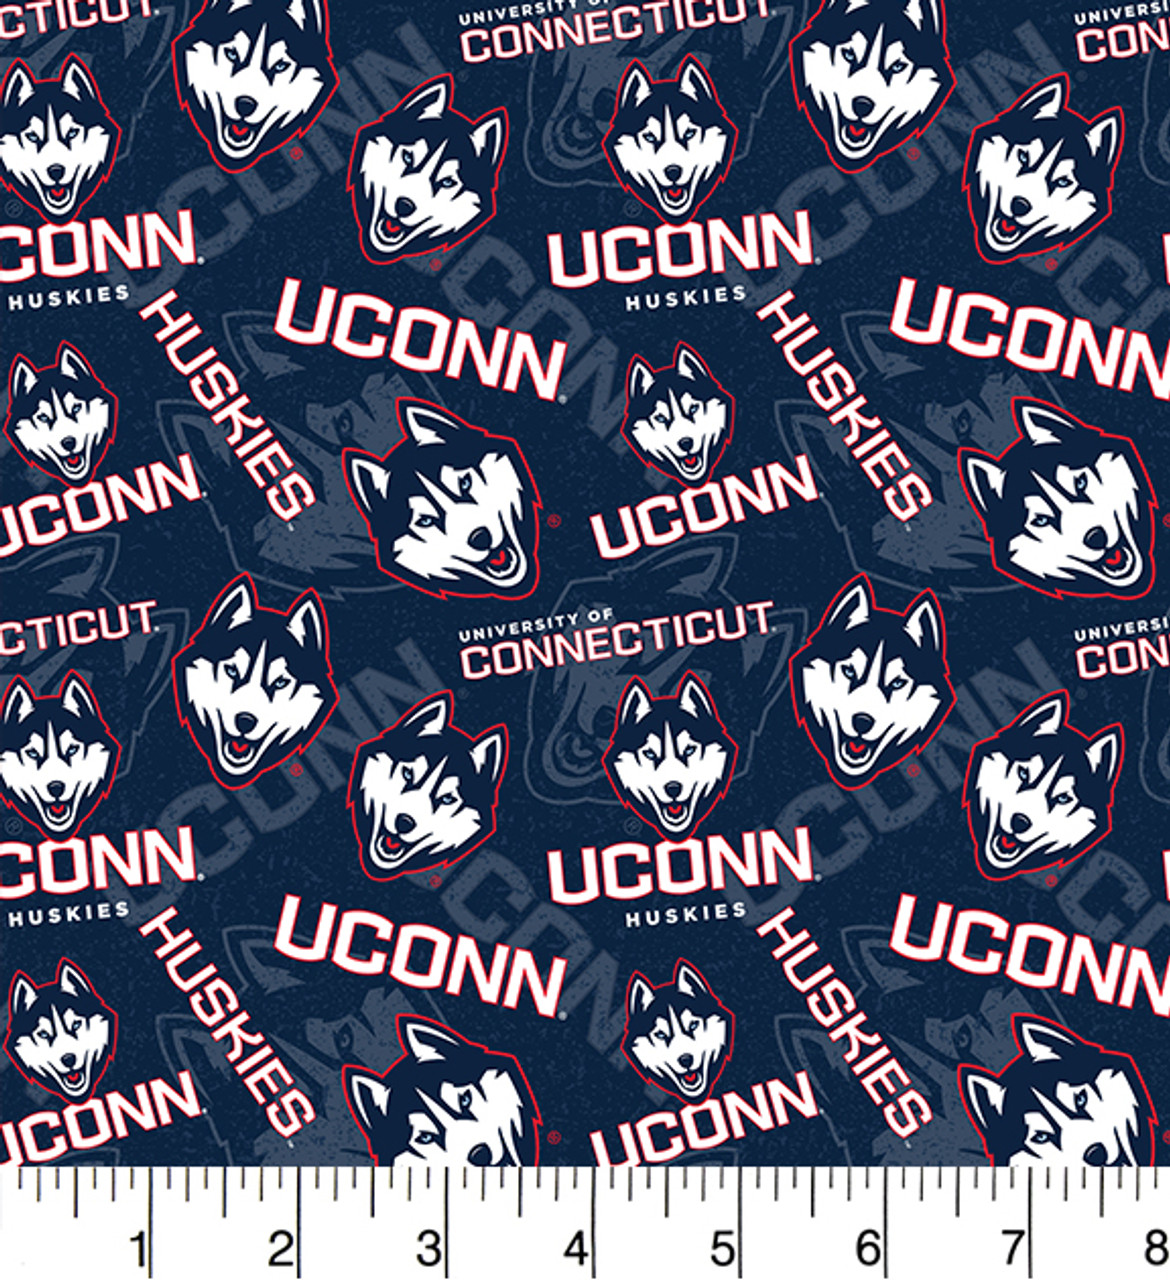 University of Connecticut Huskies Cotton Fabric with Tone On Tone Print or Matching Solid Cotton Fabrics